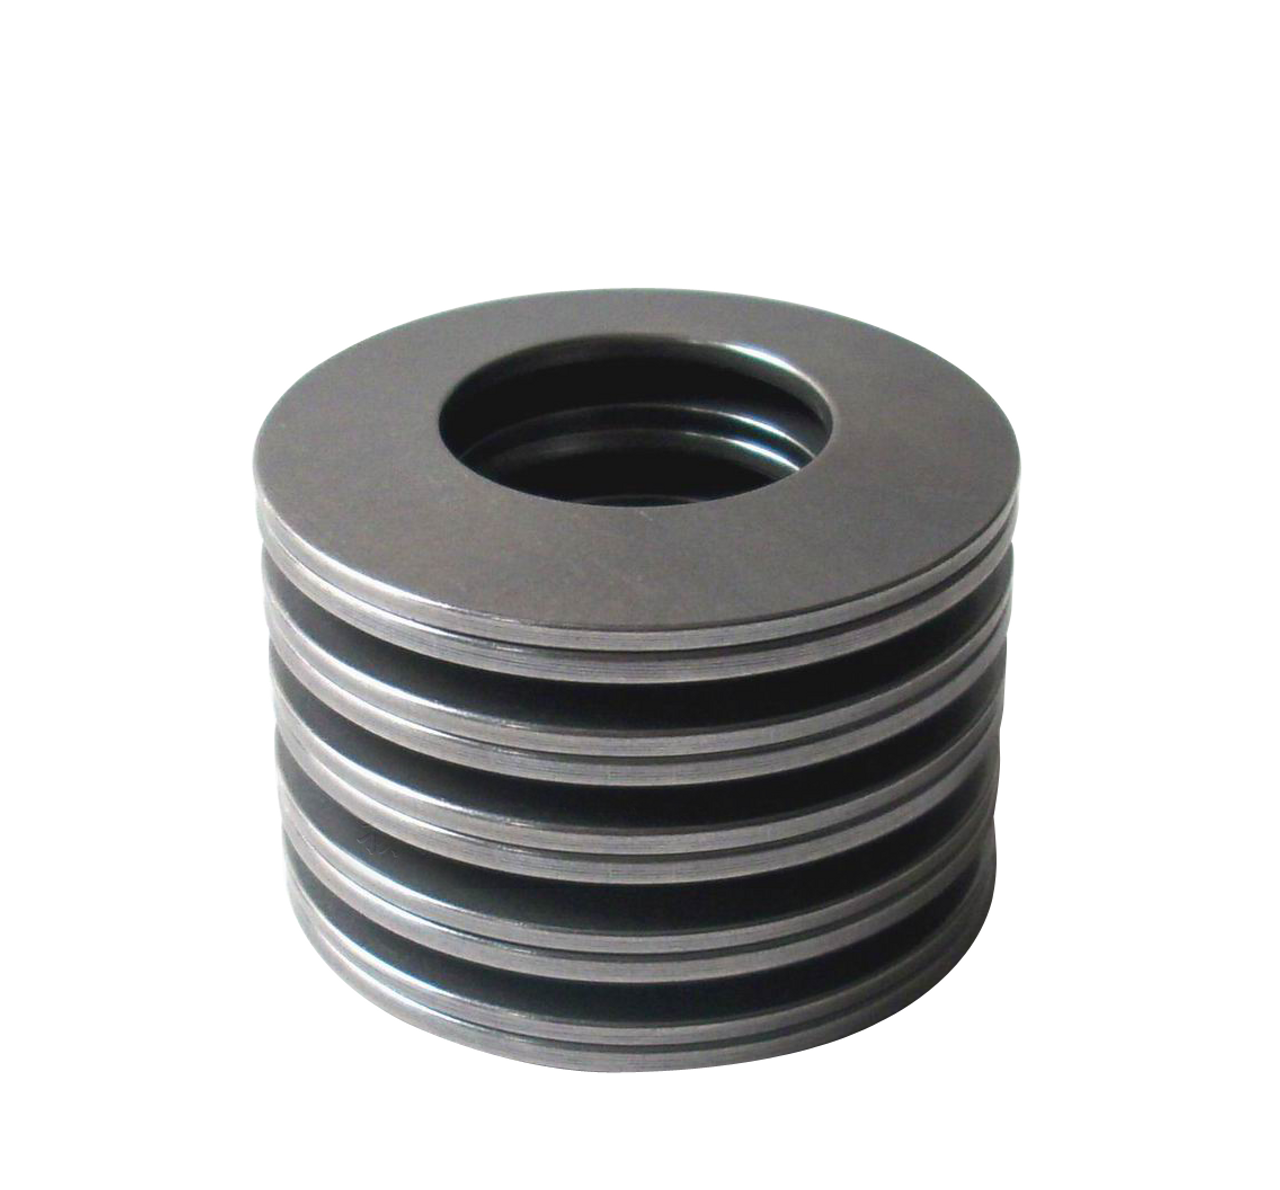 60mm Disc Spring (DIN 2093) Conical Washer  DS061.0-125-06